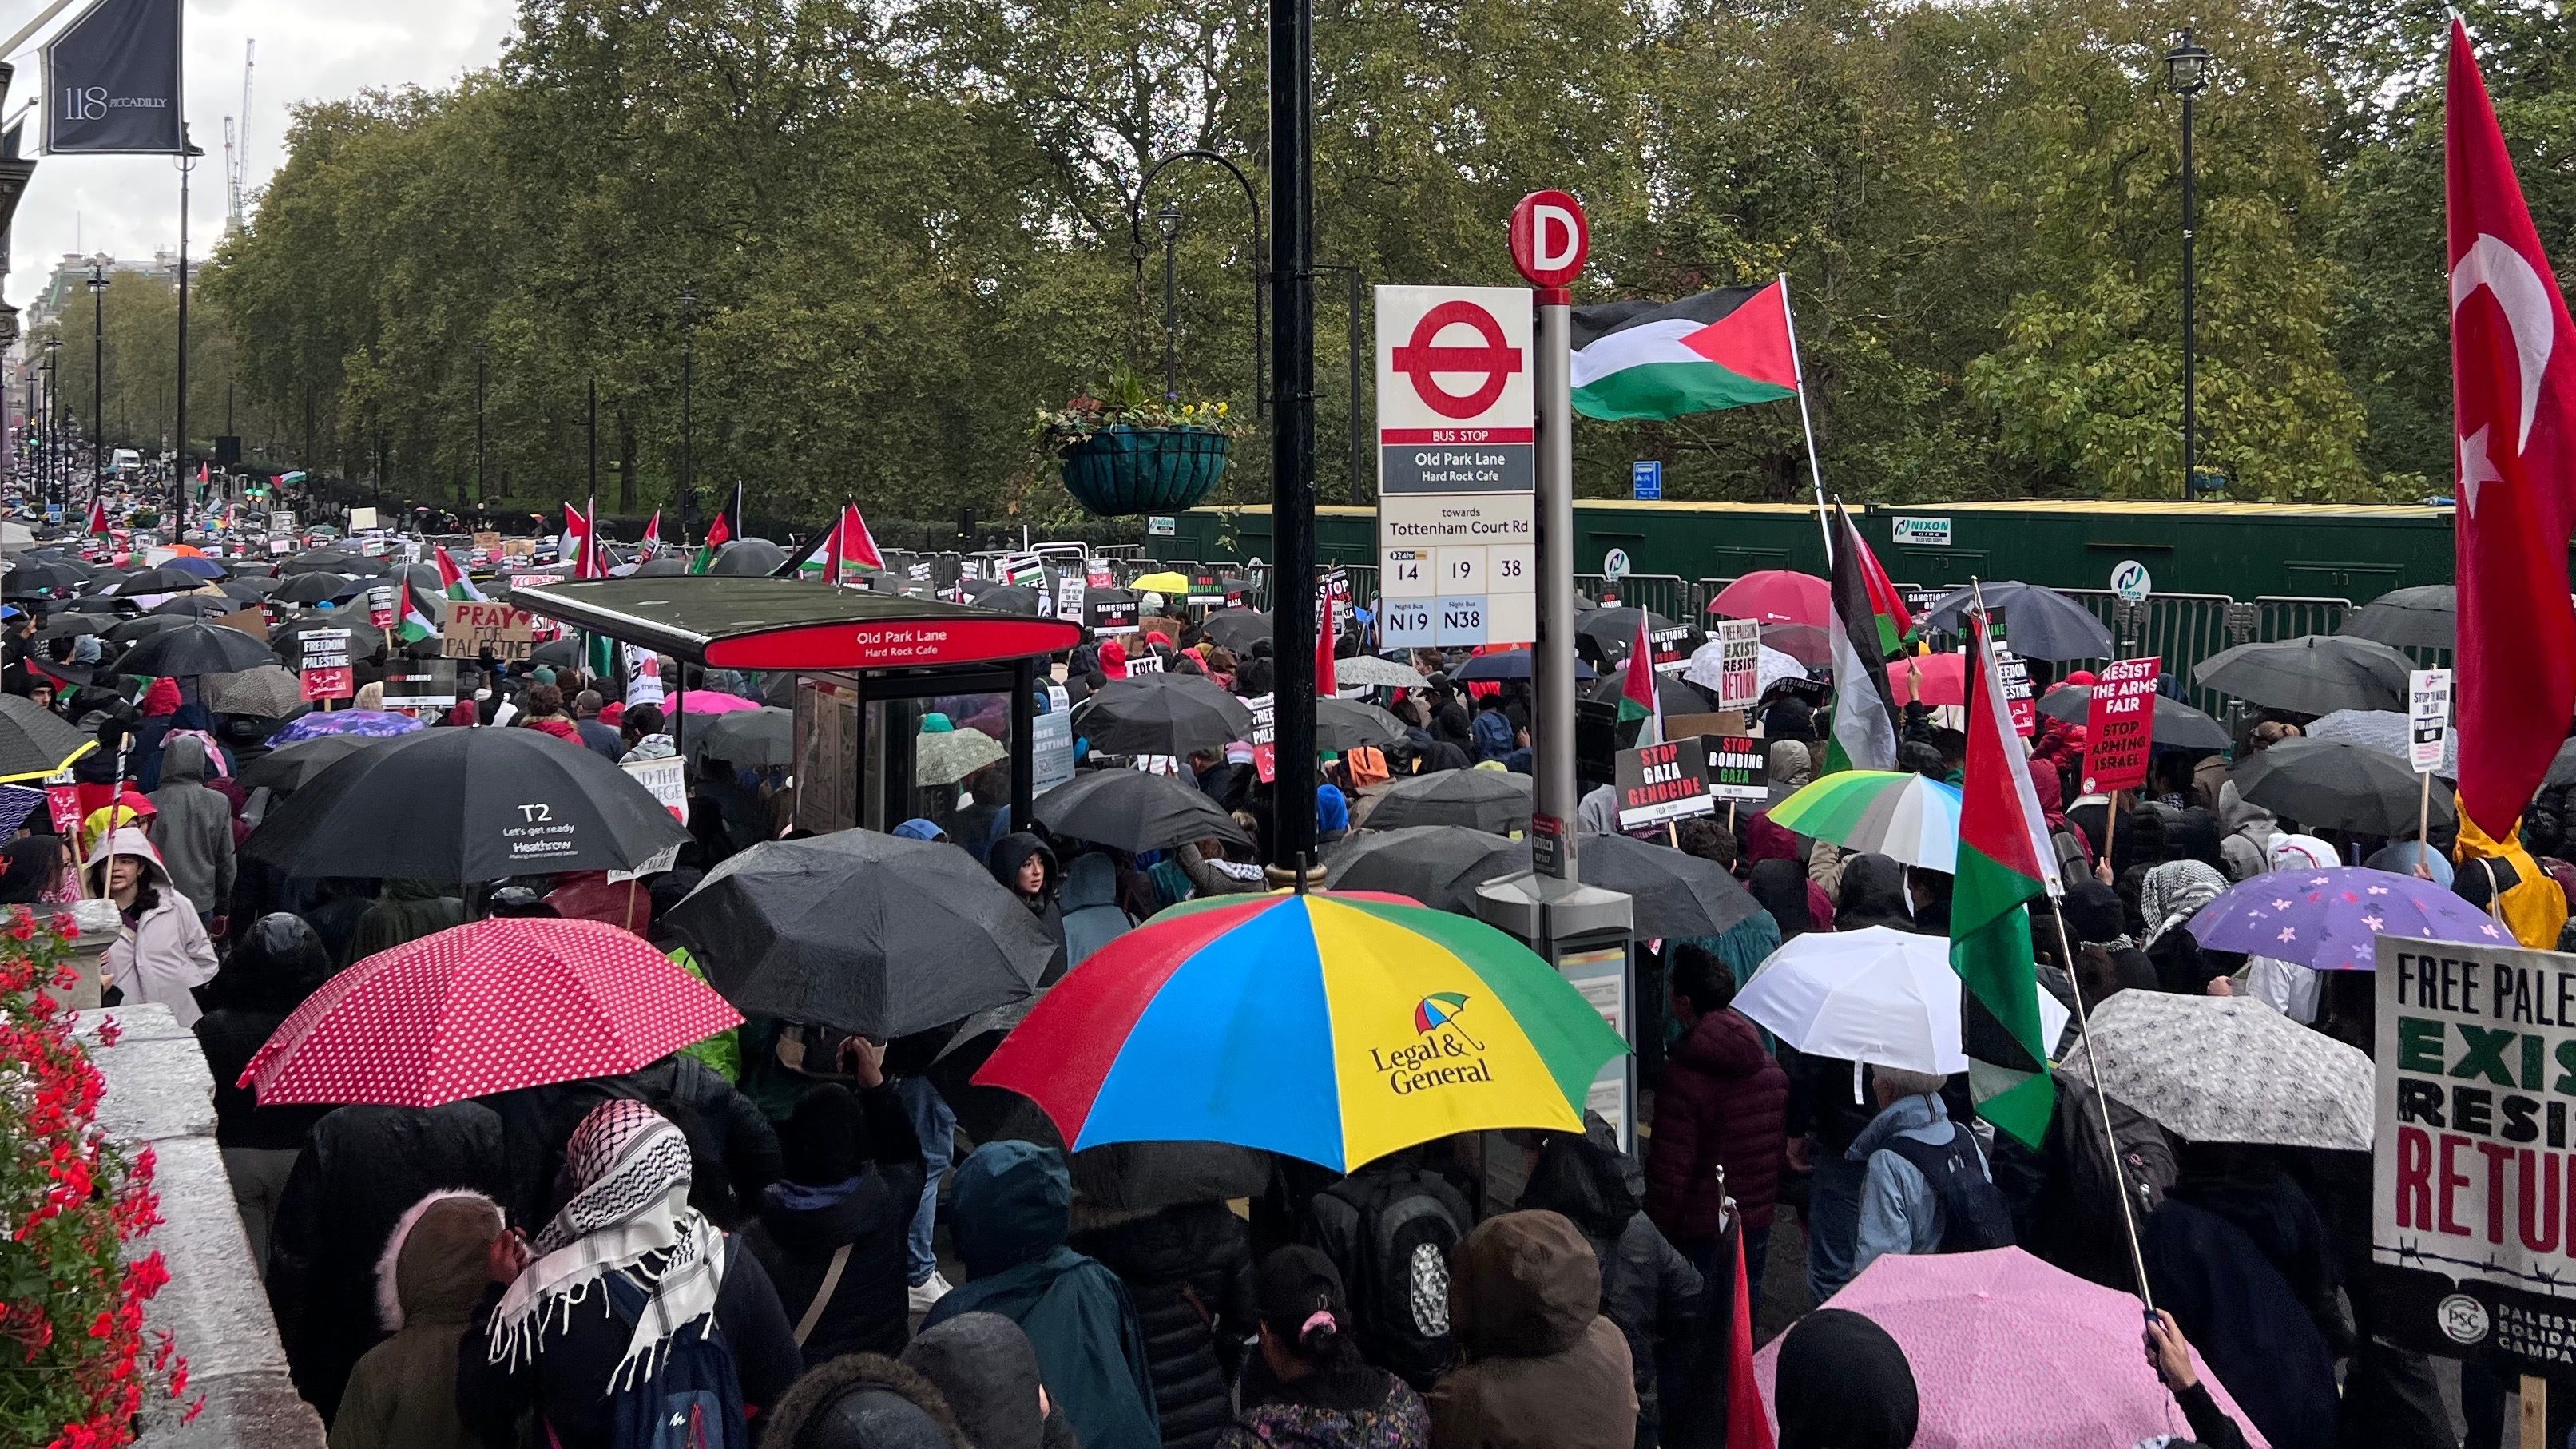 Thousands of marchers braved the rain and torrential weather to March for Palestine in central London (MEE/Areeb Ullah)